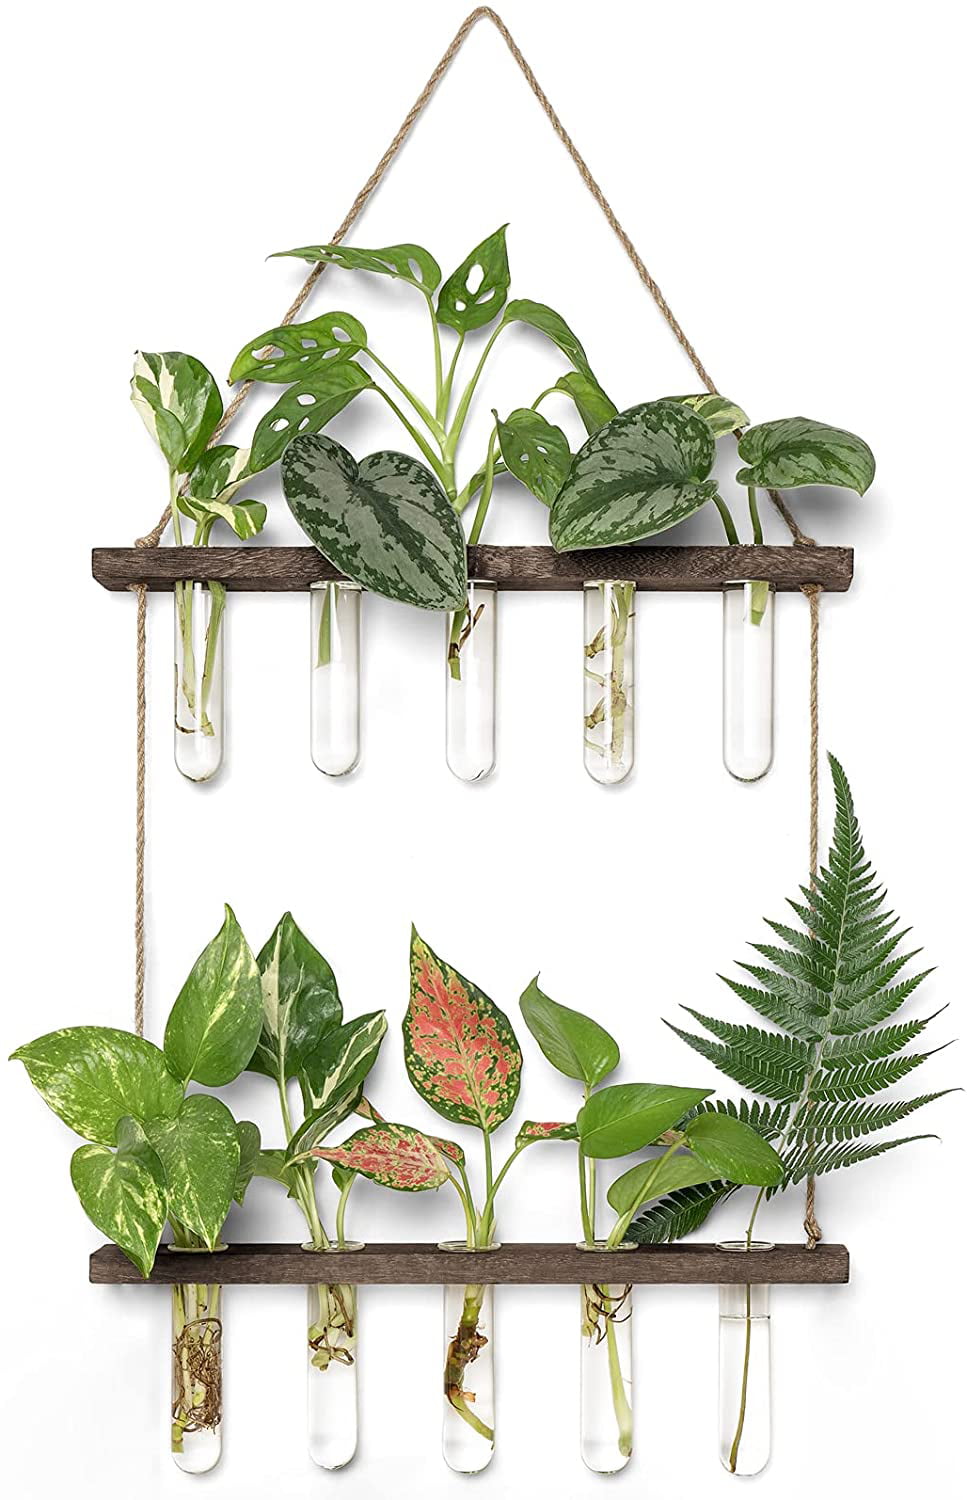 2 Tiered Plant Propagation Stations Plant Terrarium with Wooden Stand Wall Hanging Planter Brown Glass Planter Test Tube Vase for Propagating Hydroponic Plants Home Office Garden Decor-8 Bulb Vase 